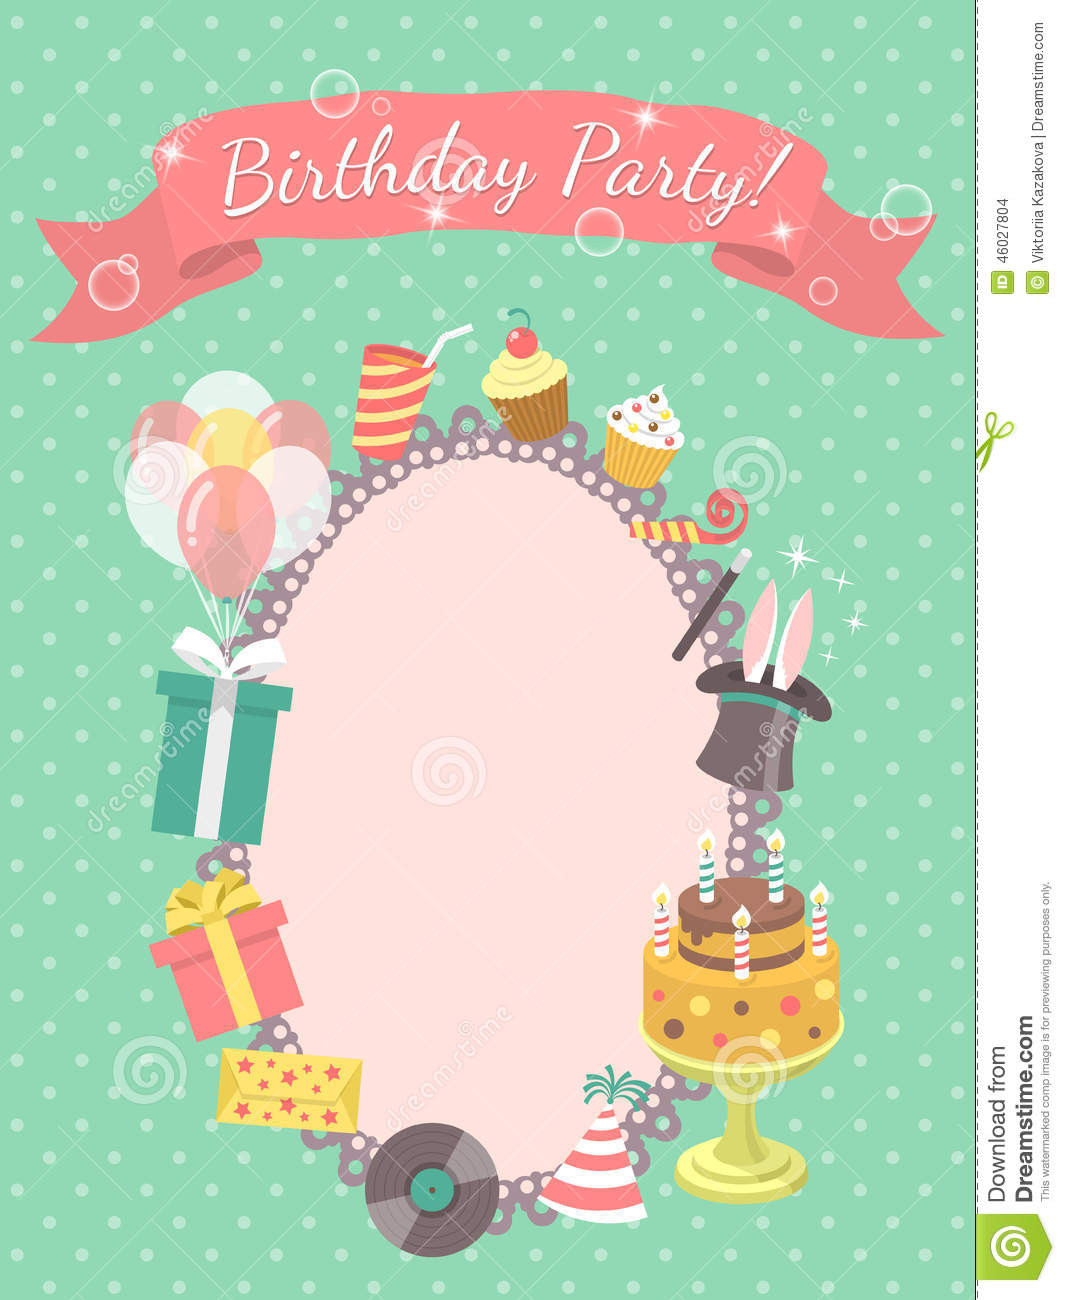 Best ideas about Birthday Party Card
. Save or Pin Birthday Party Invitation Card Stock Vector Illustration Now.